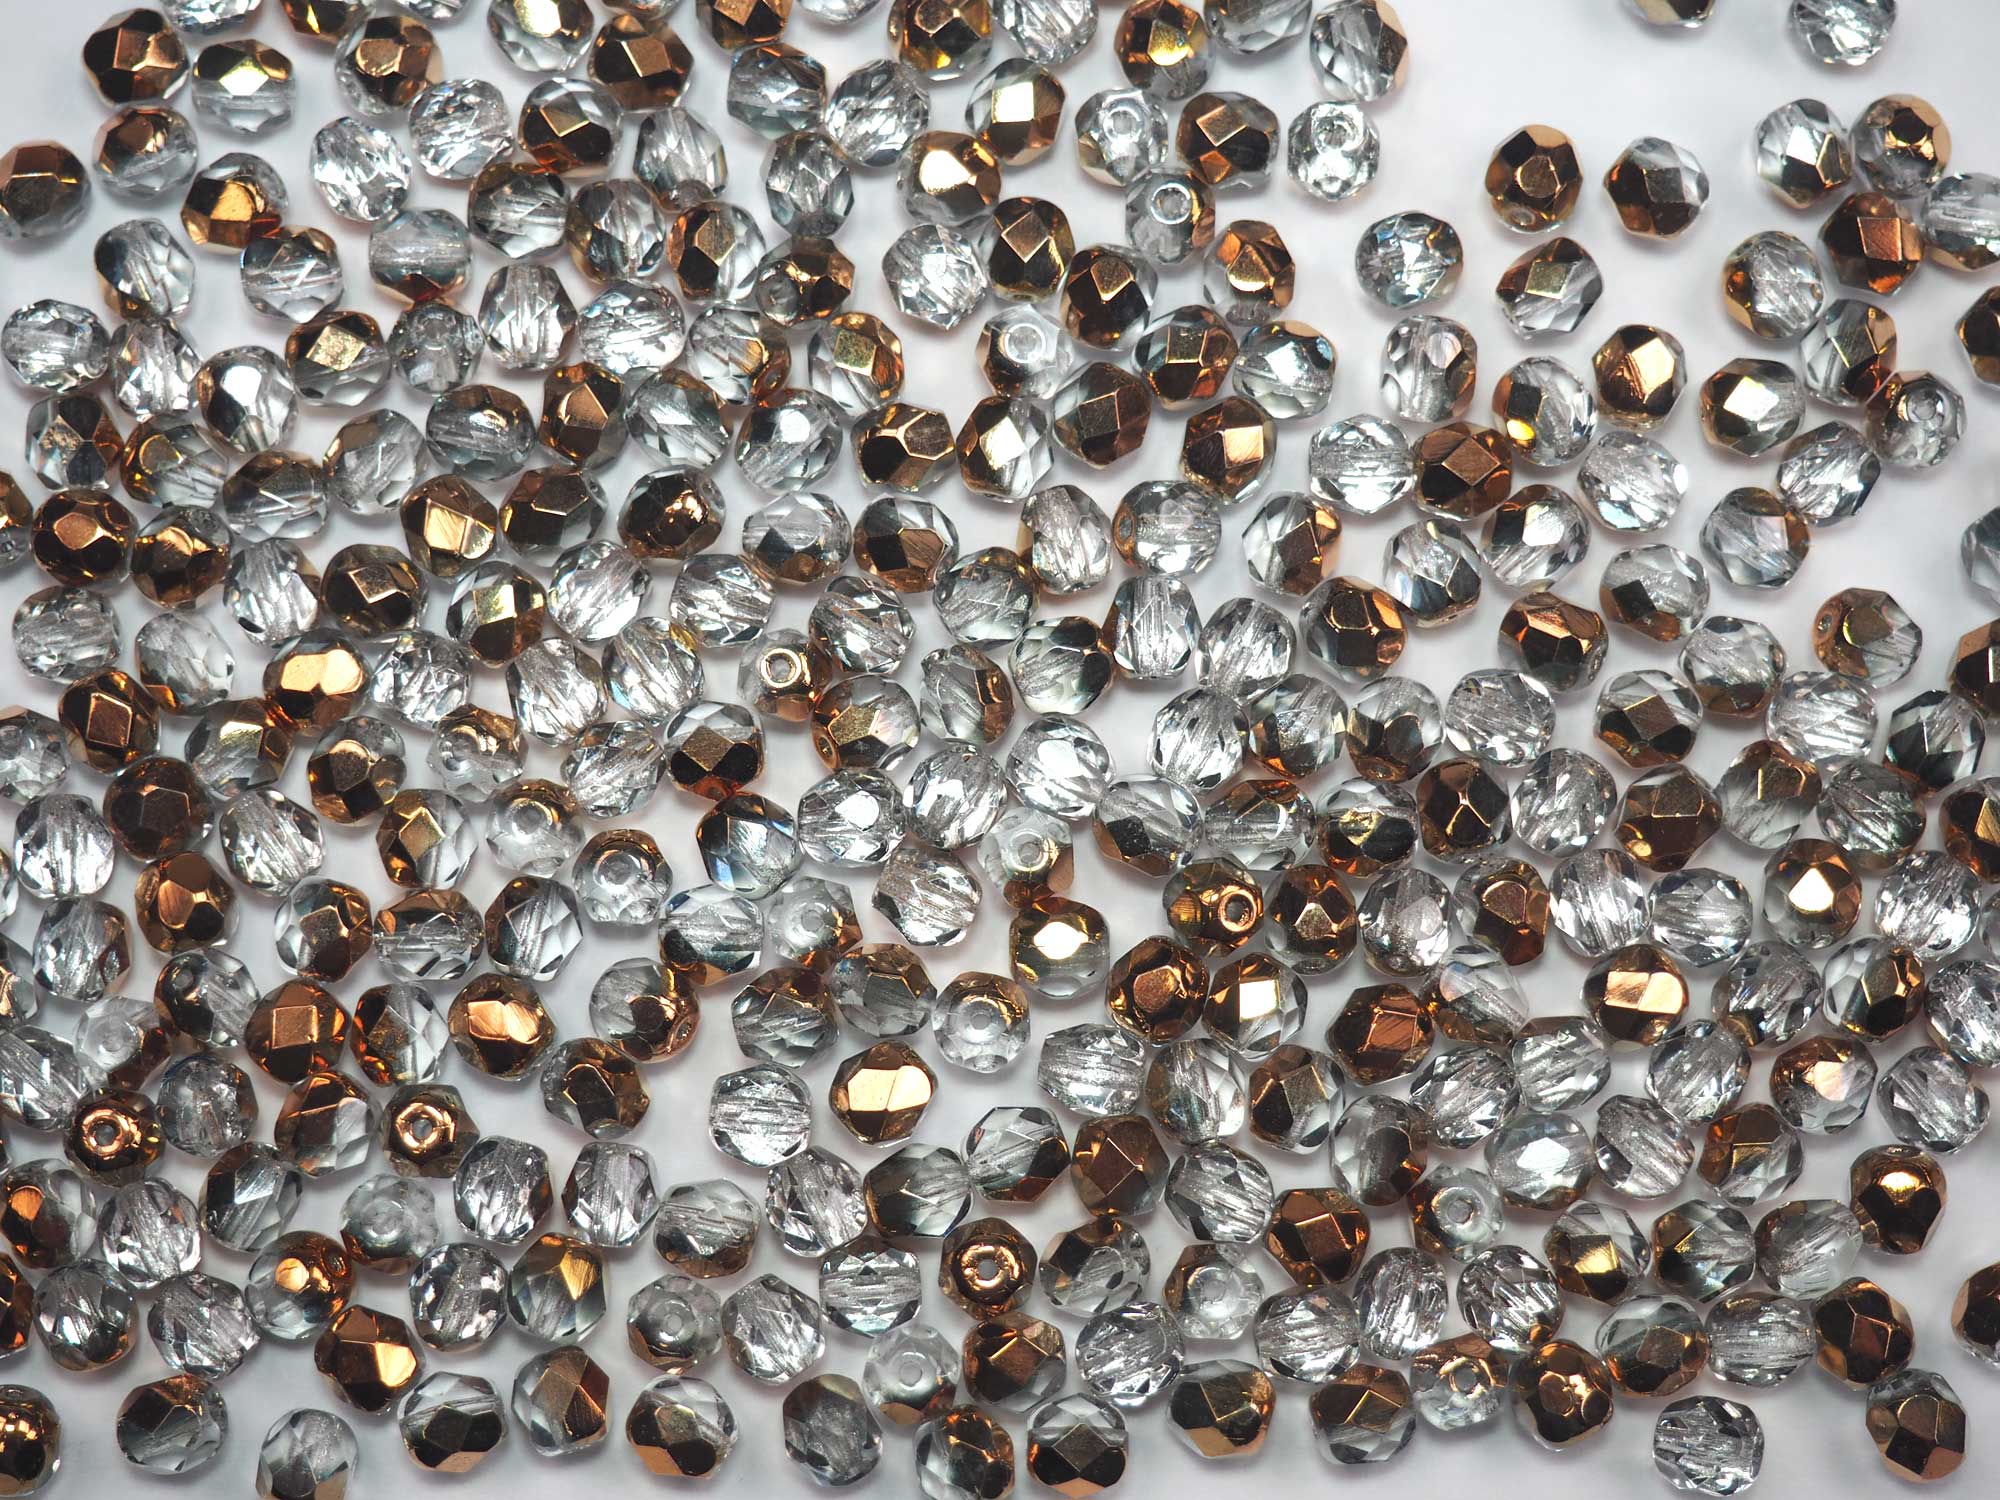 Crystal Aureate Pink Gold Half coated, loose Czech Fire Polished Round Faceted Glass Beads, 6mm 68pcs